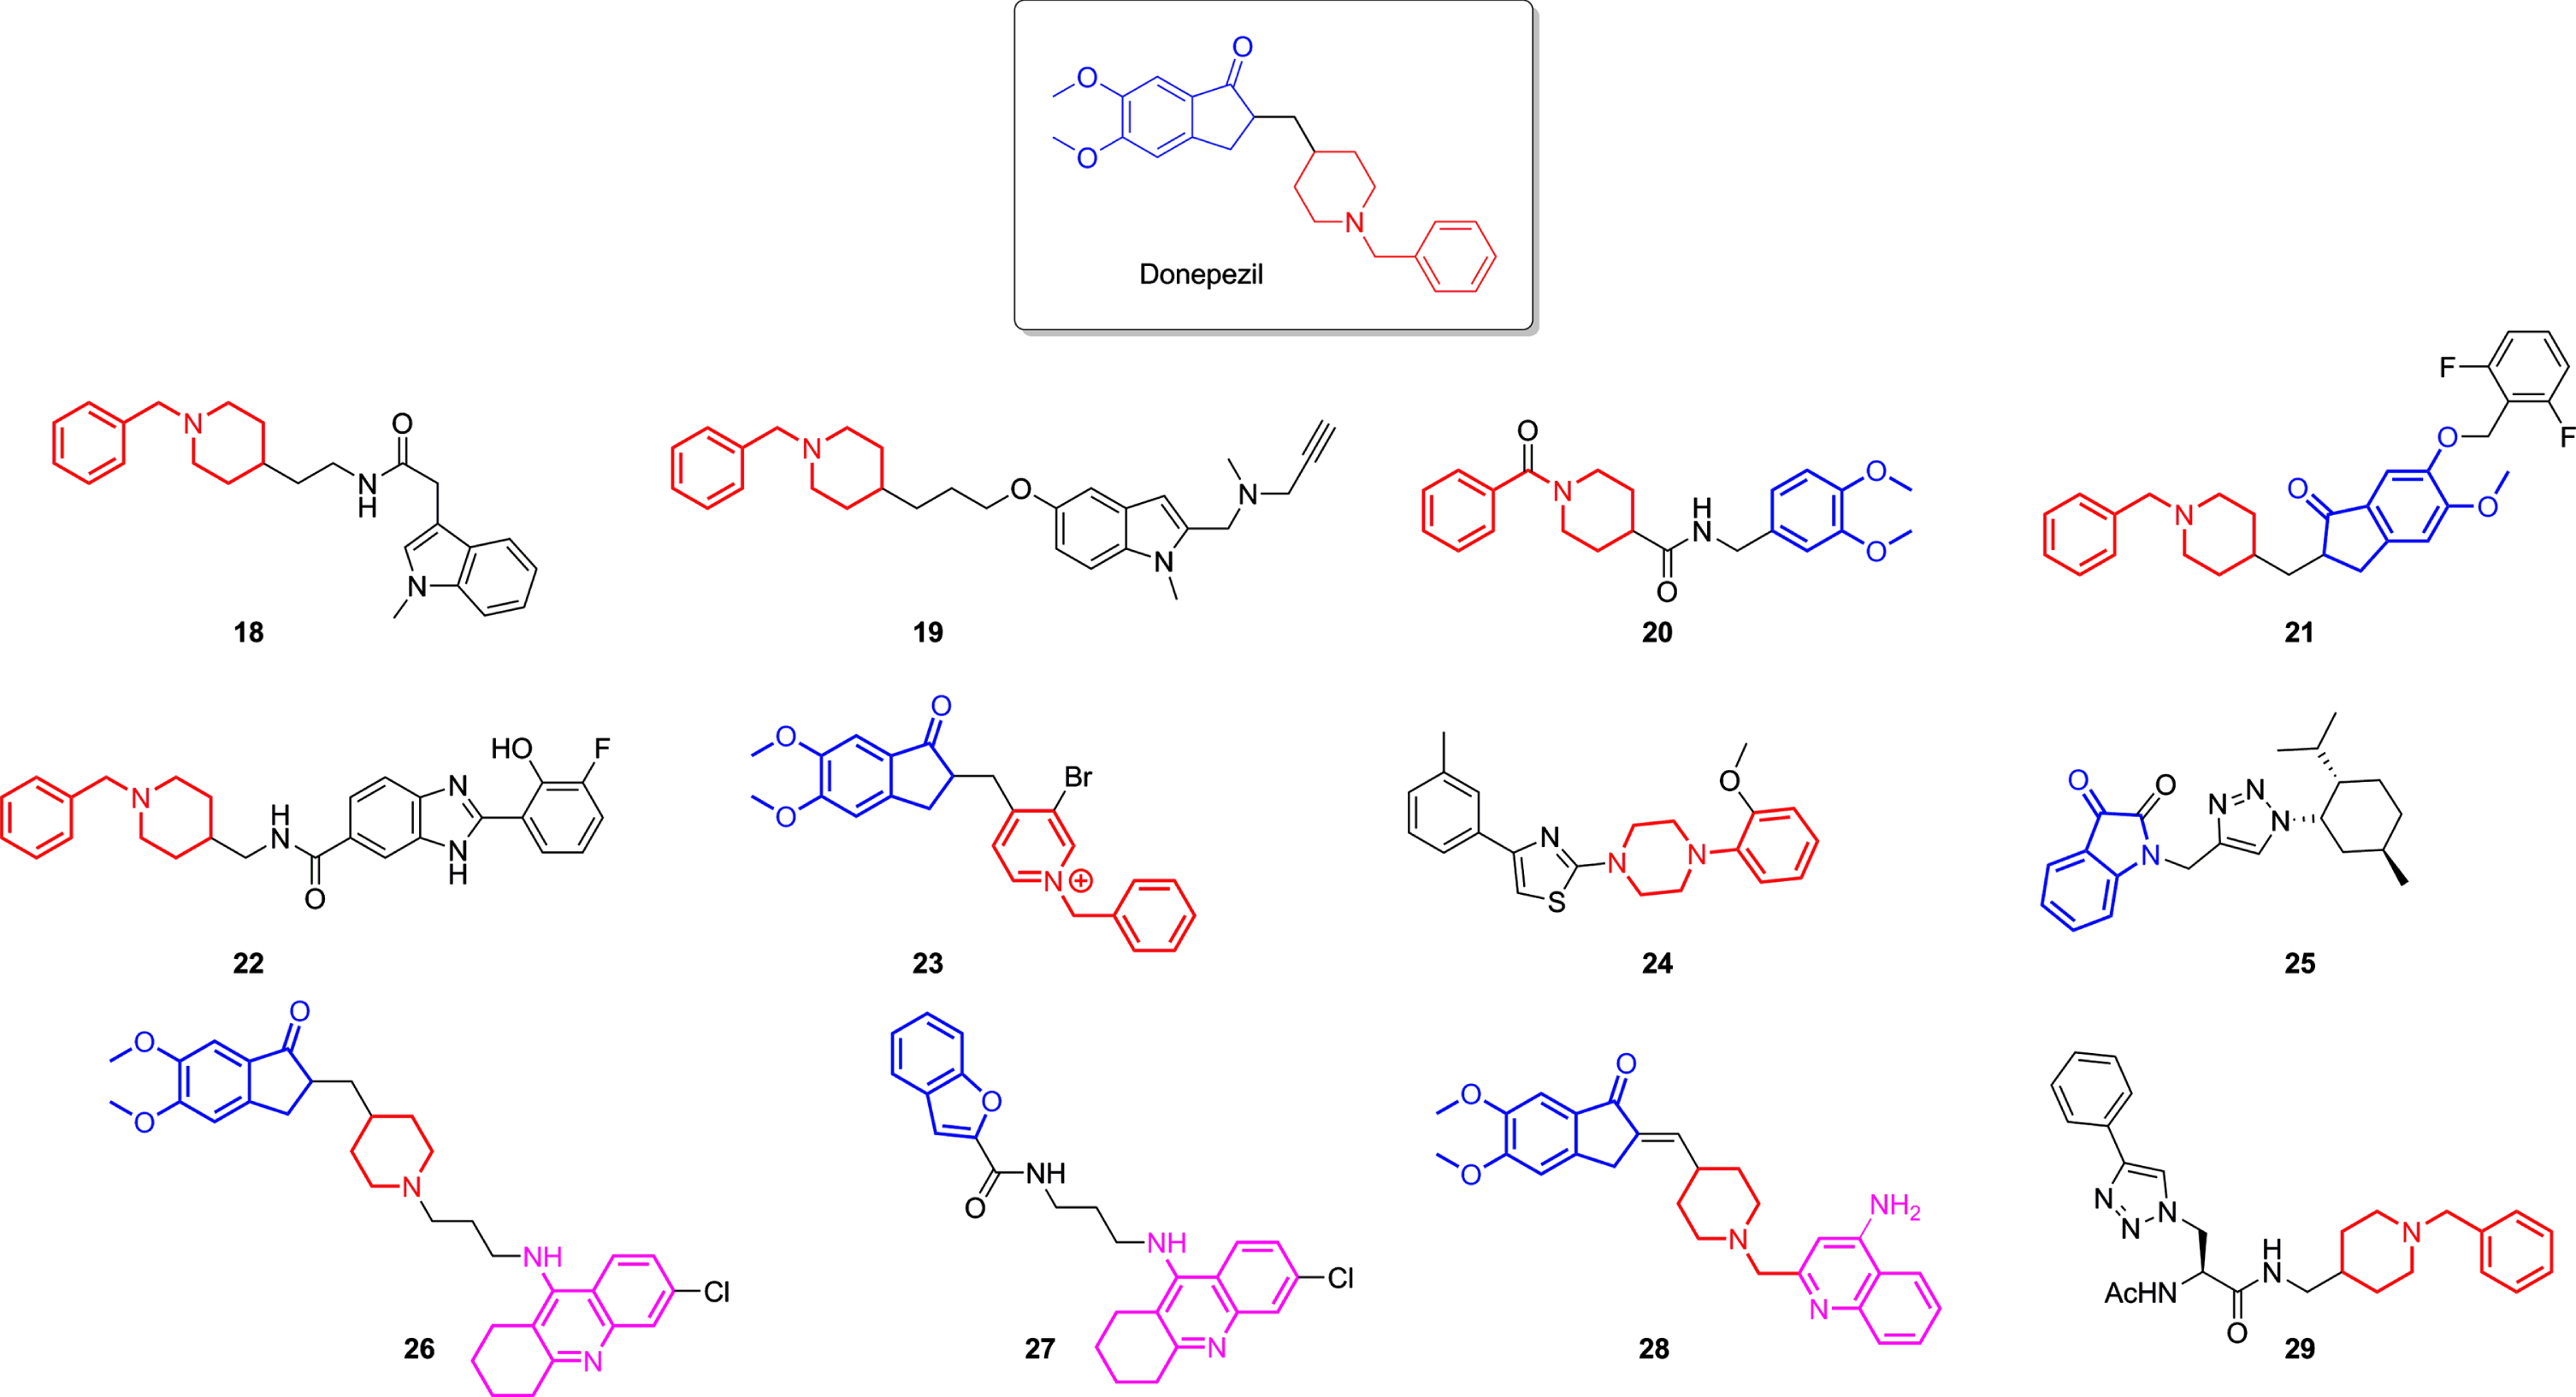 Donepezil and some of the most potent ChE inhibitors derived from donepezil lately developed. Highlighted in blue are the indanone fragments, in red benzylpiperidines moieties, and in pink the 1,2,3,4-tetrahydroakridin-9-amine rings in each structure.